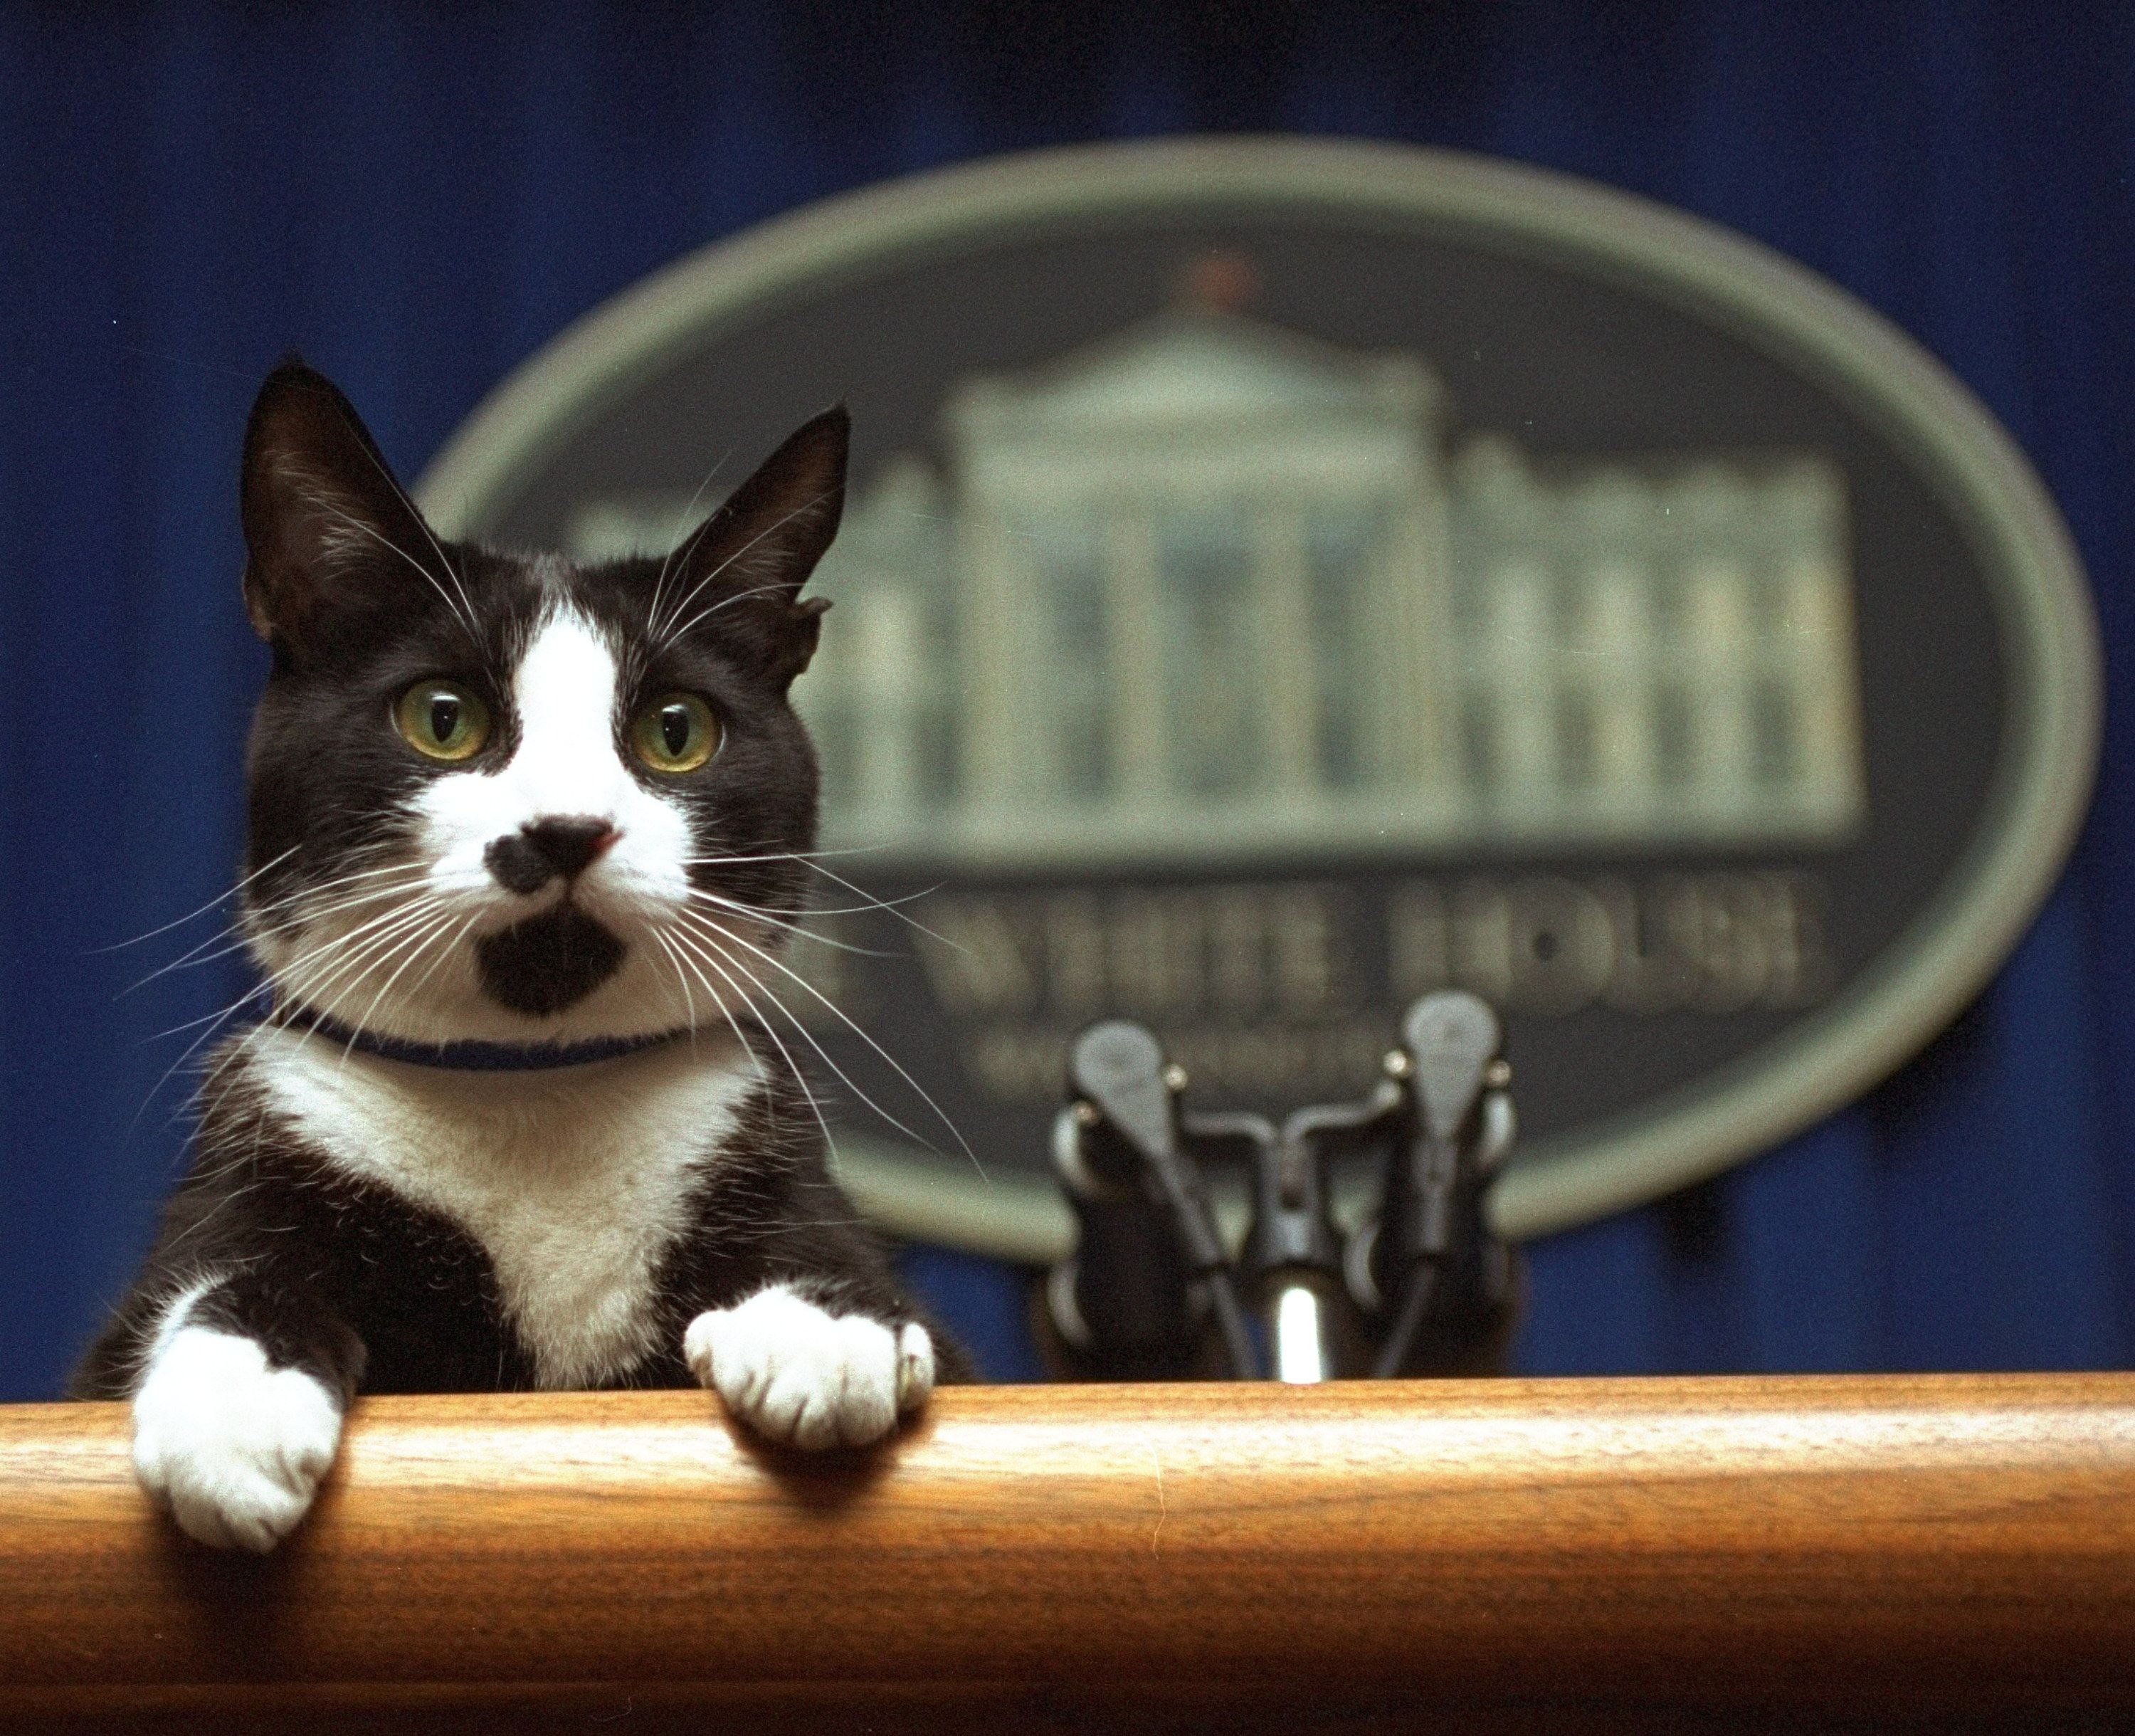 Socks, Clintons' cat at White House, dies | The Spokesman-Review